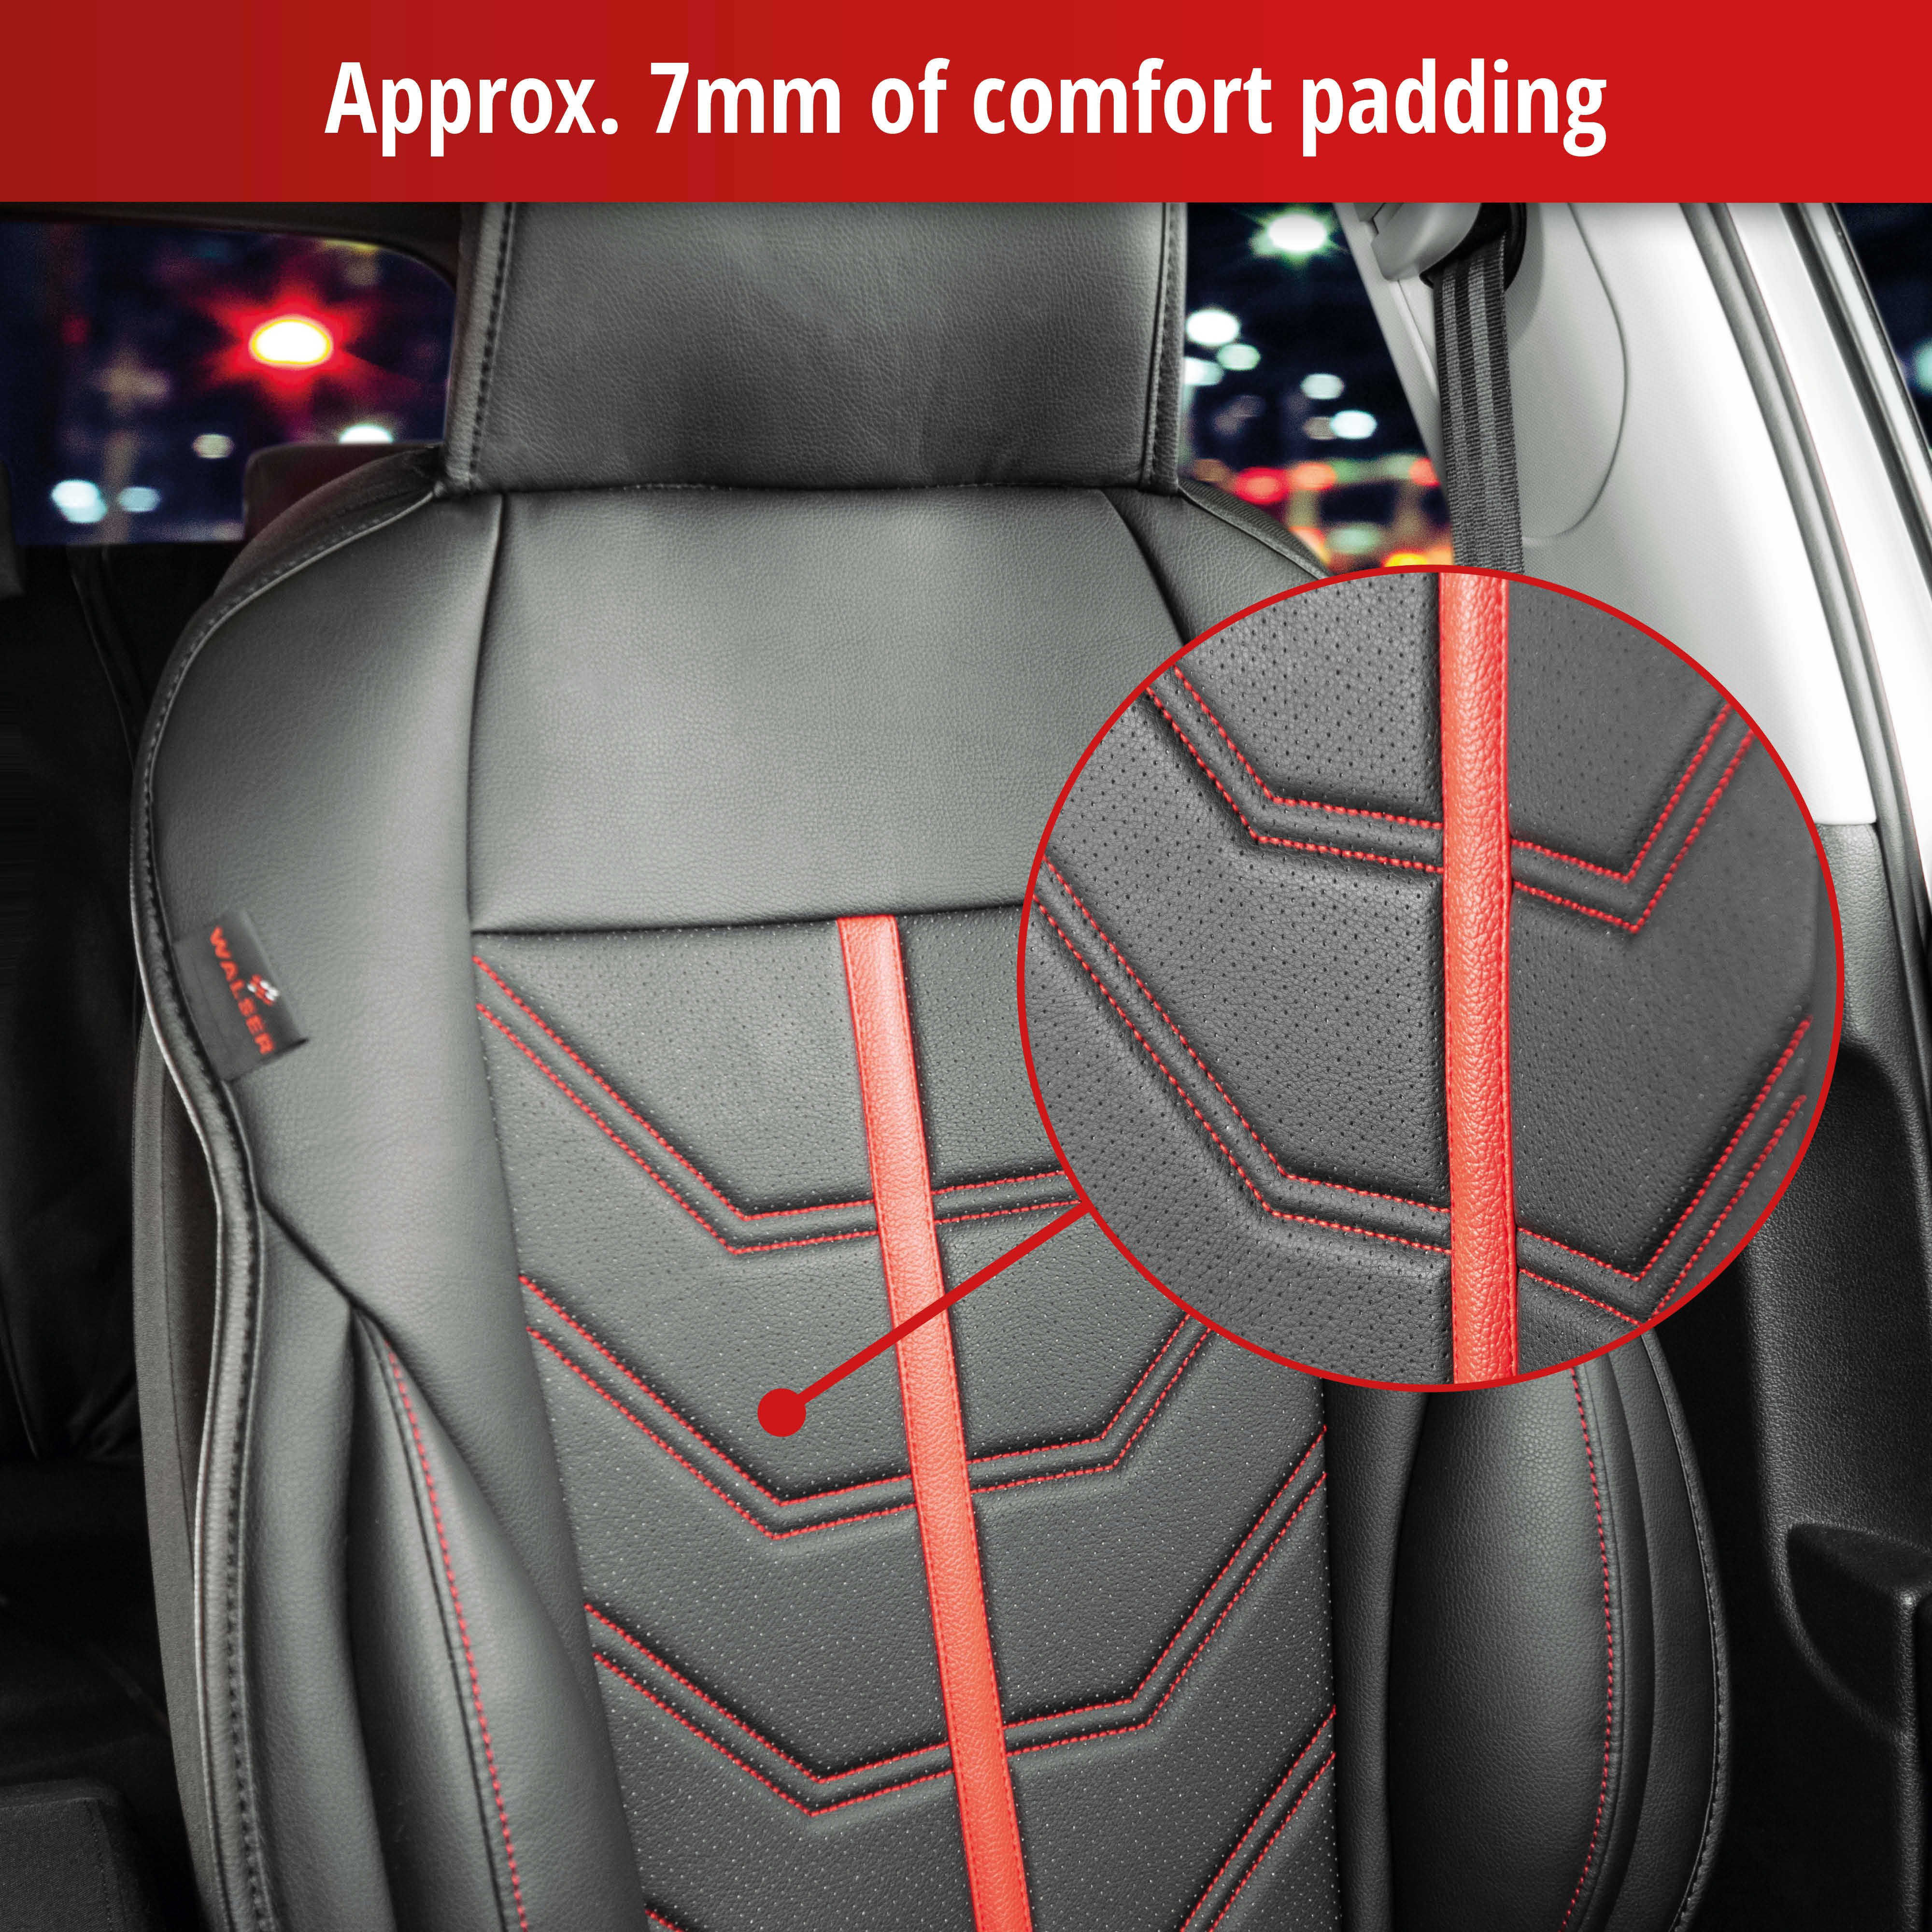 Car Seat cover Kimi, seat protector for cars in racing look black/red